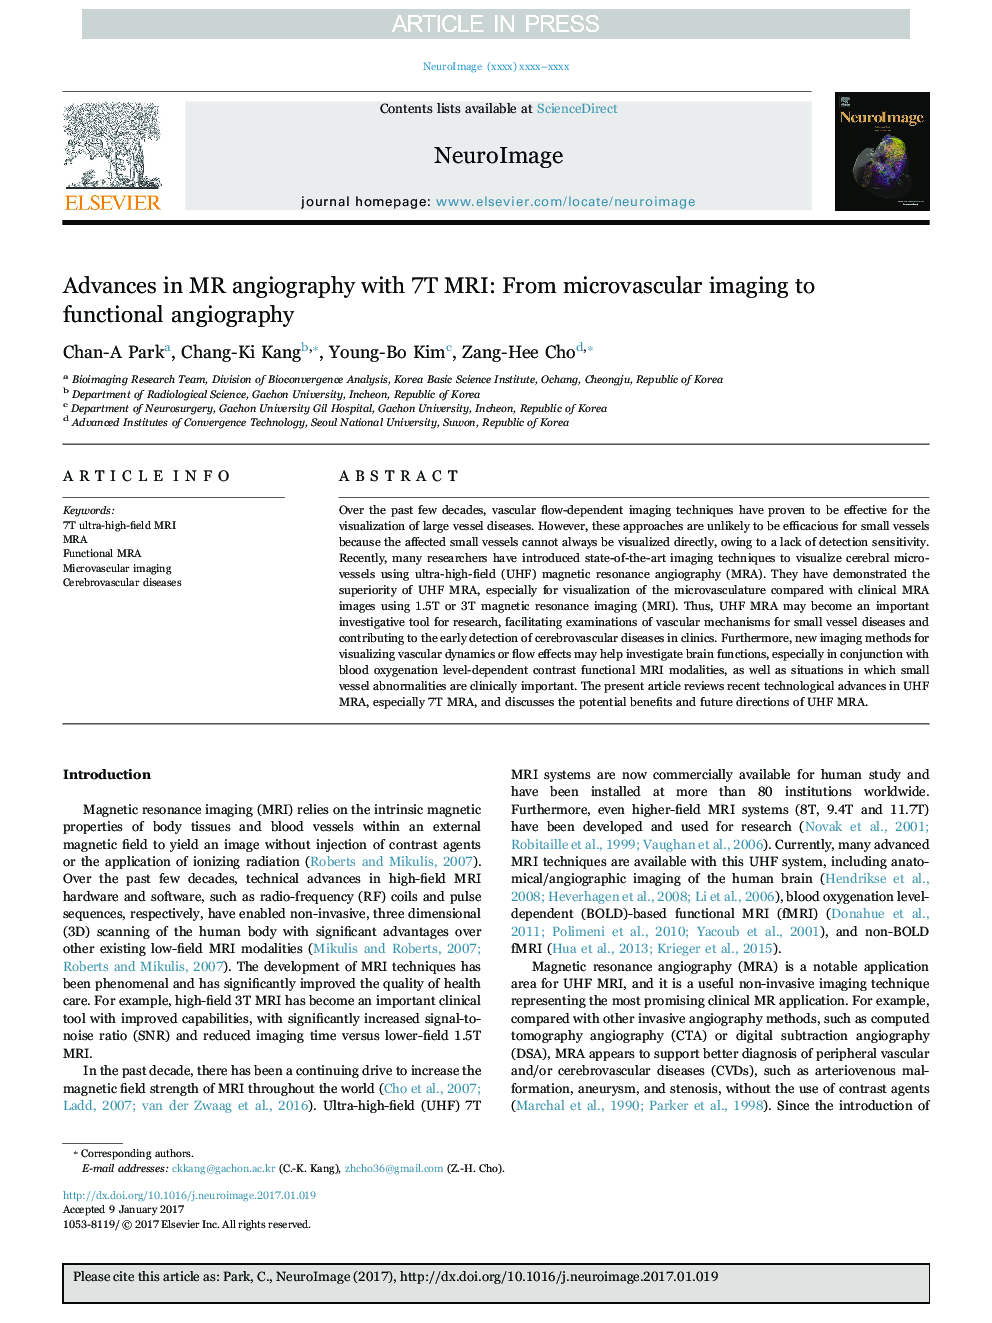 Advances in MR angiography with 7T MRI: From microvascular imaging to functional angiography